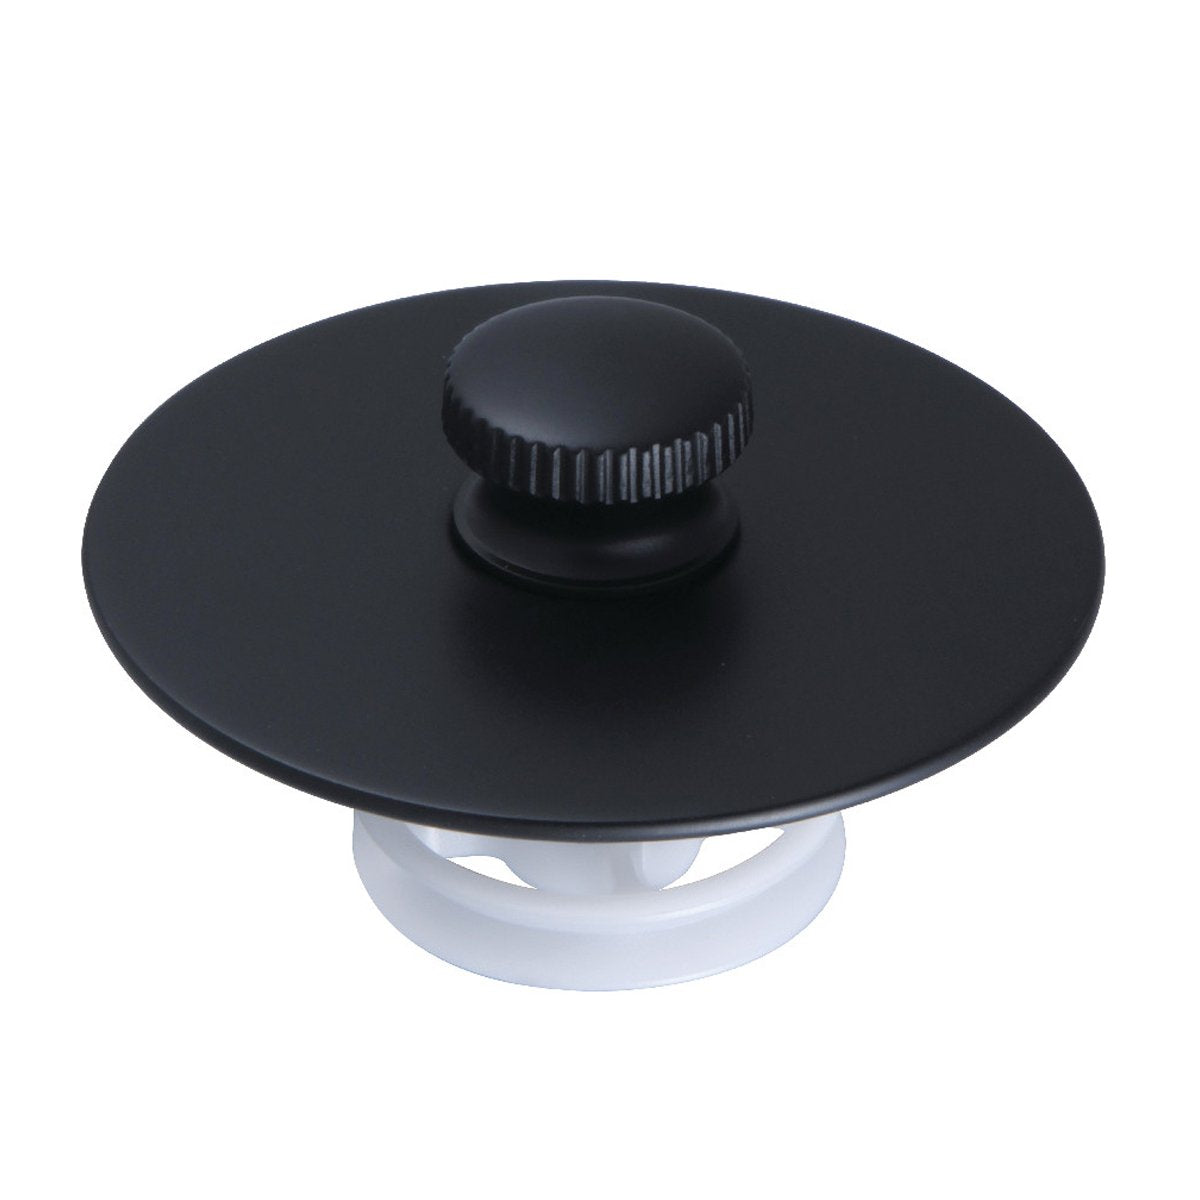 Kingston Brass Quick Cover-Up Tub Stopper